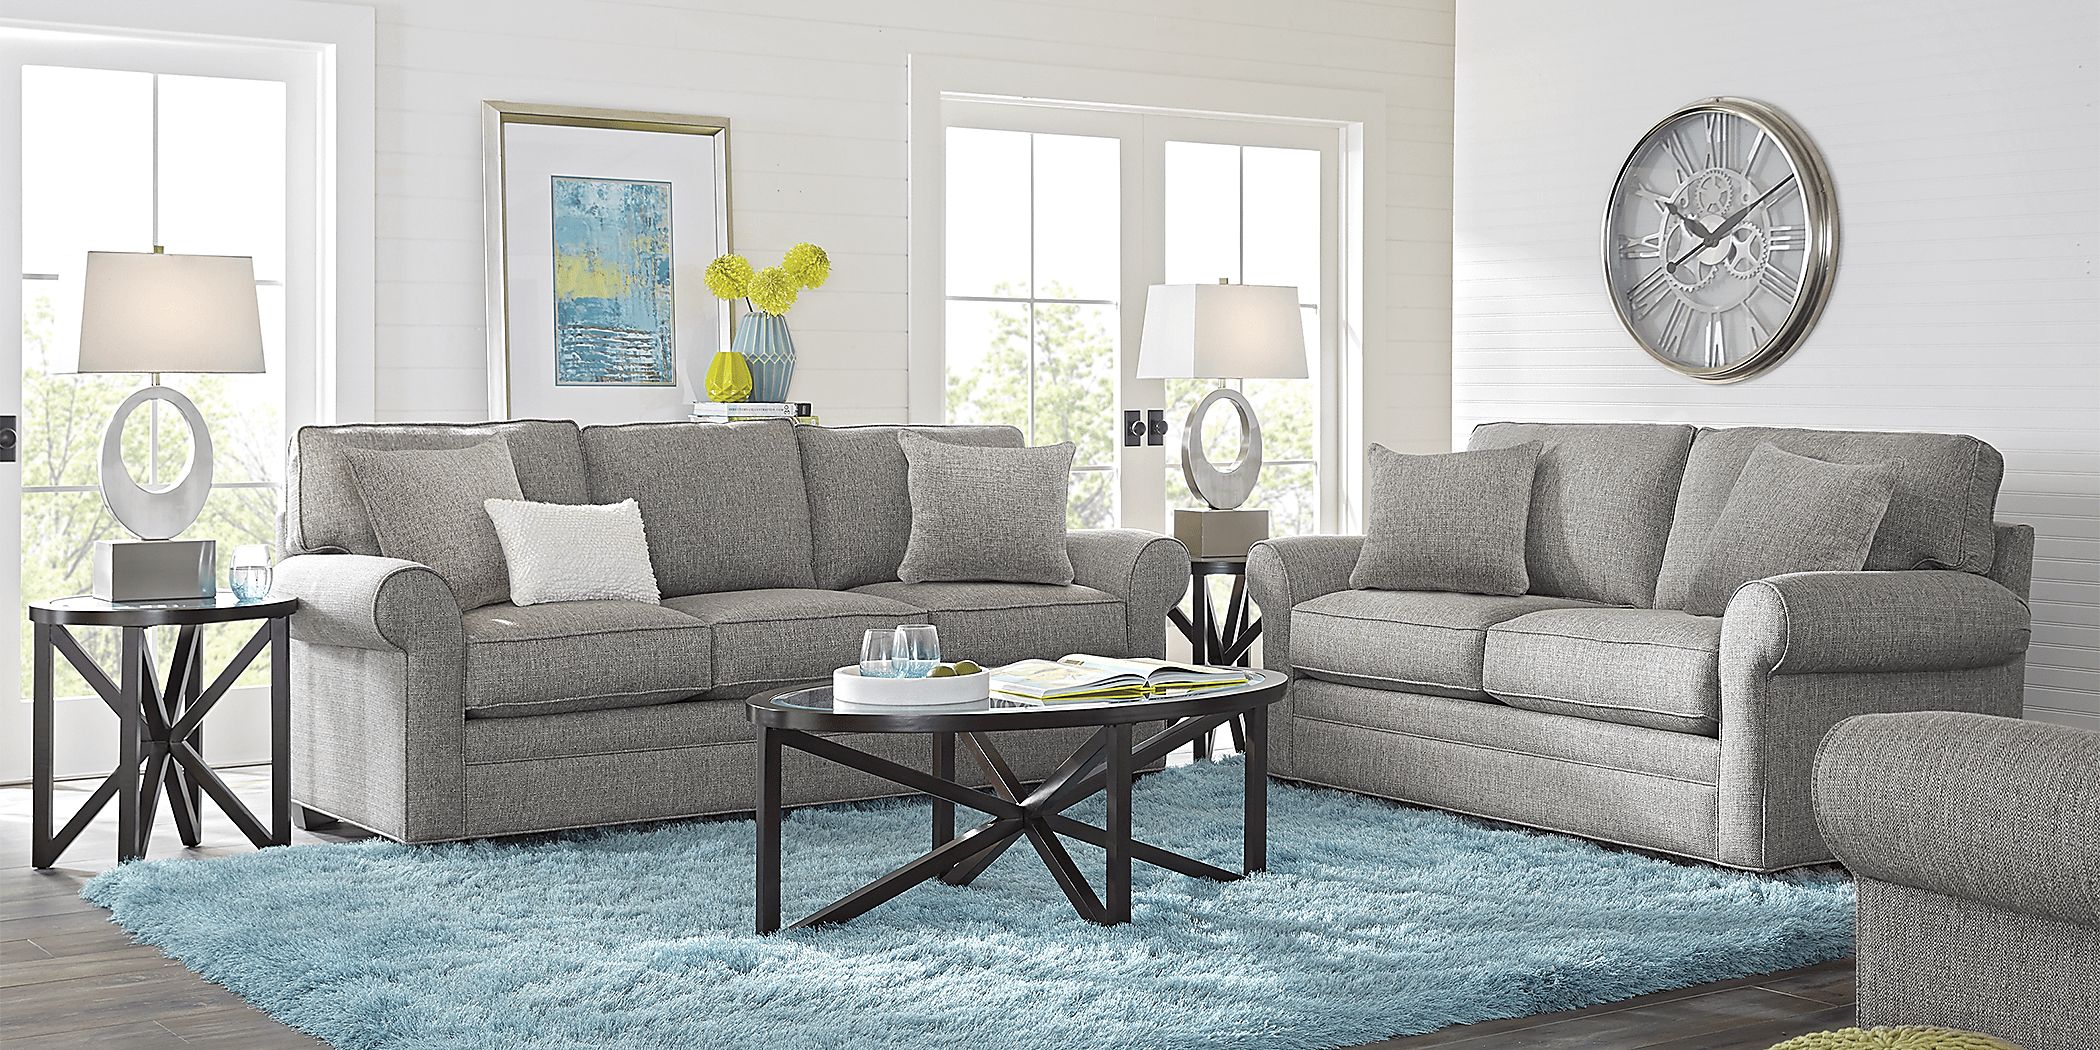 Bellingham Gray Textured 7 Pc Living Room with Sleeper Sofa